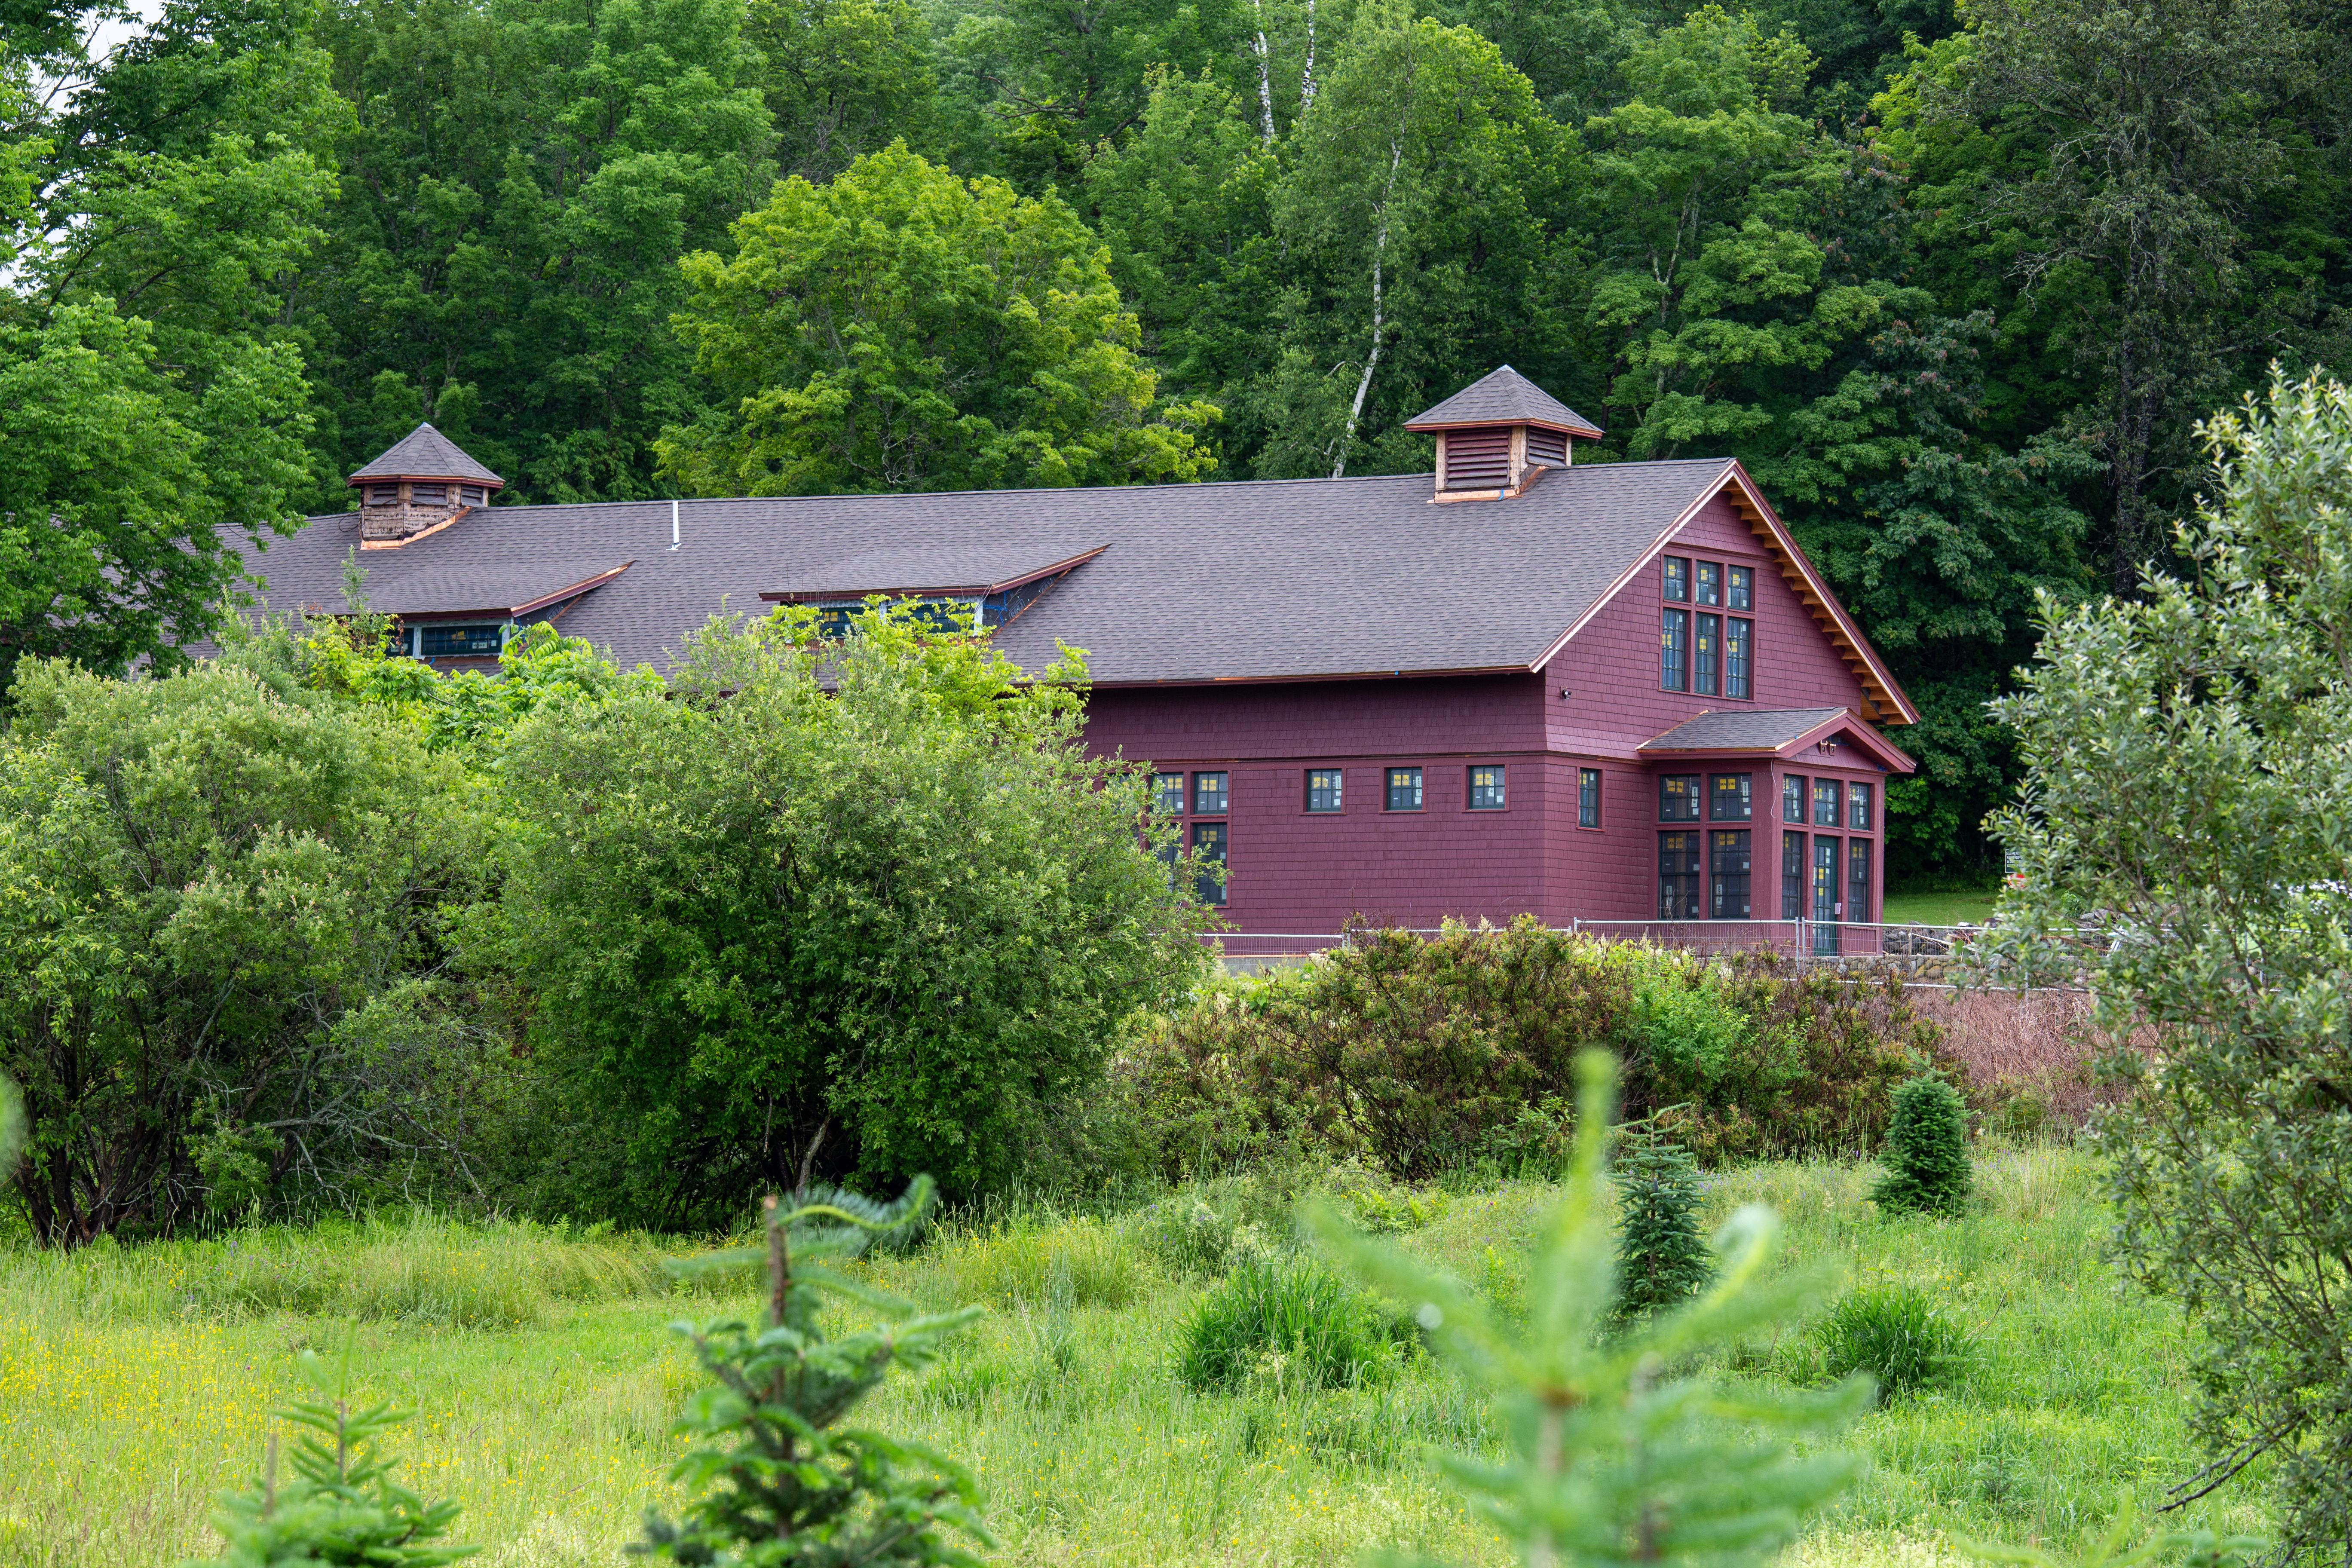 A view of the Carriage Barn under construction this summer.